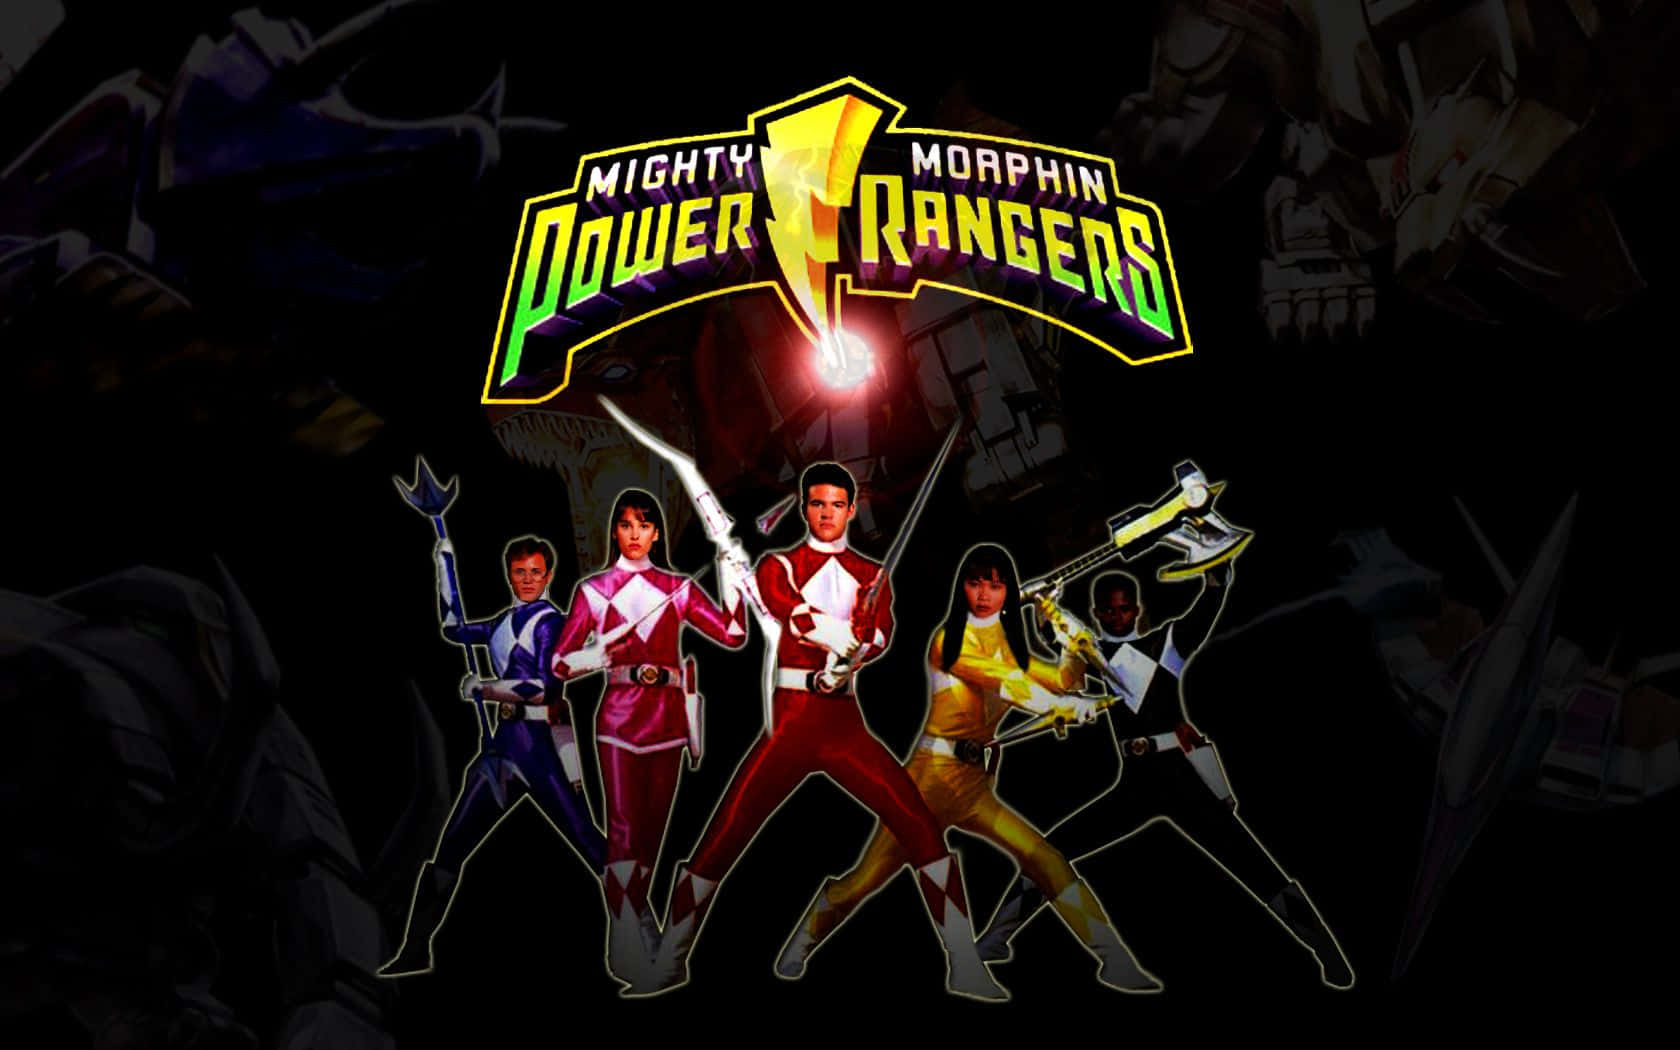 Mighty Power Rangers Ready for Action